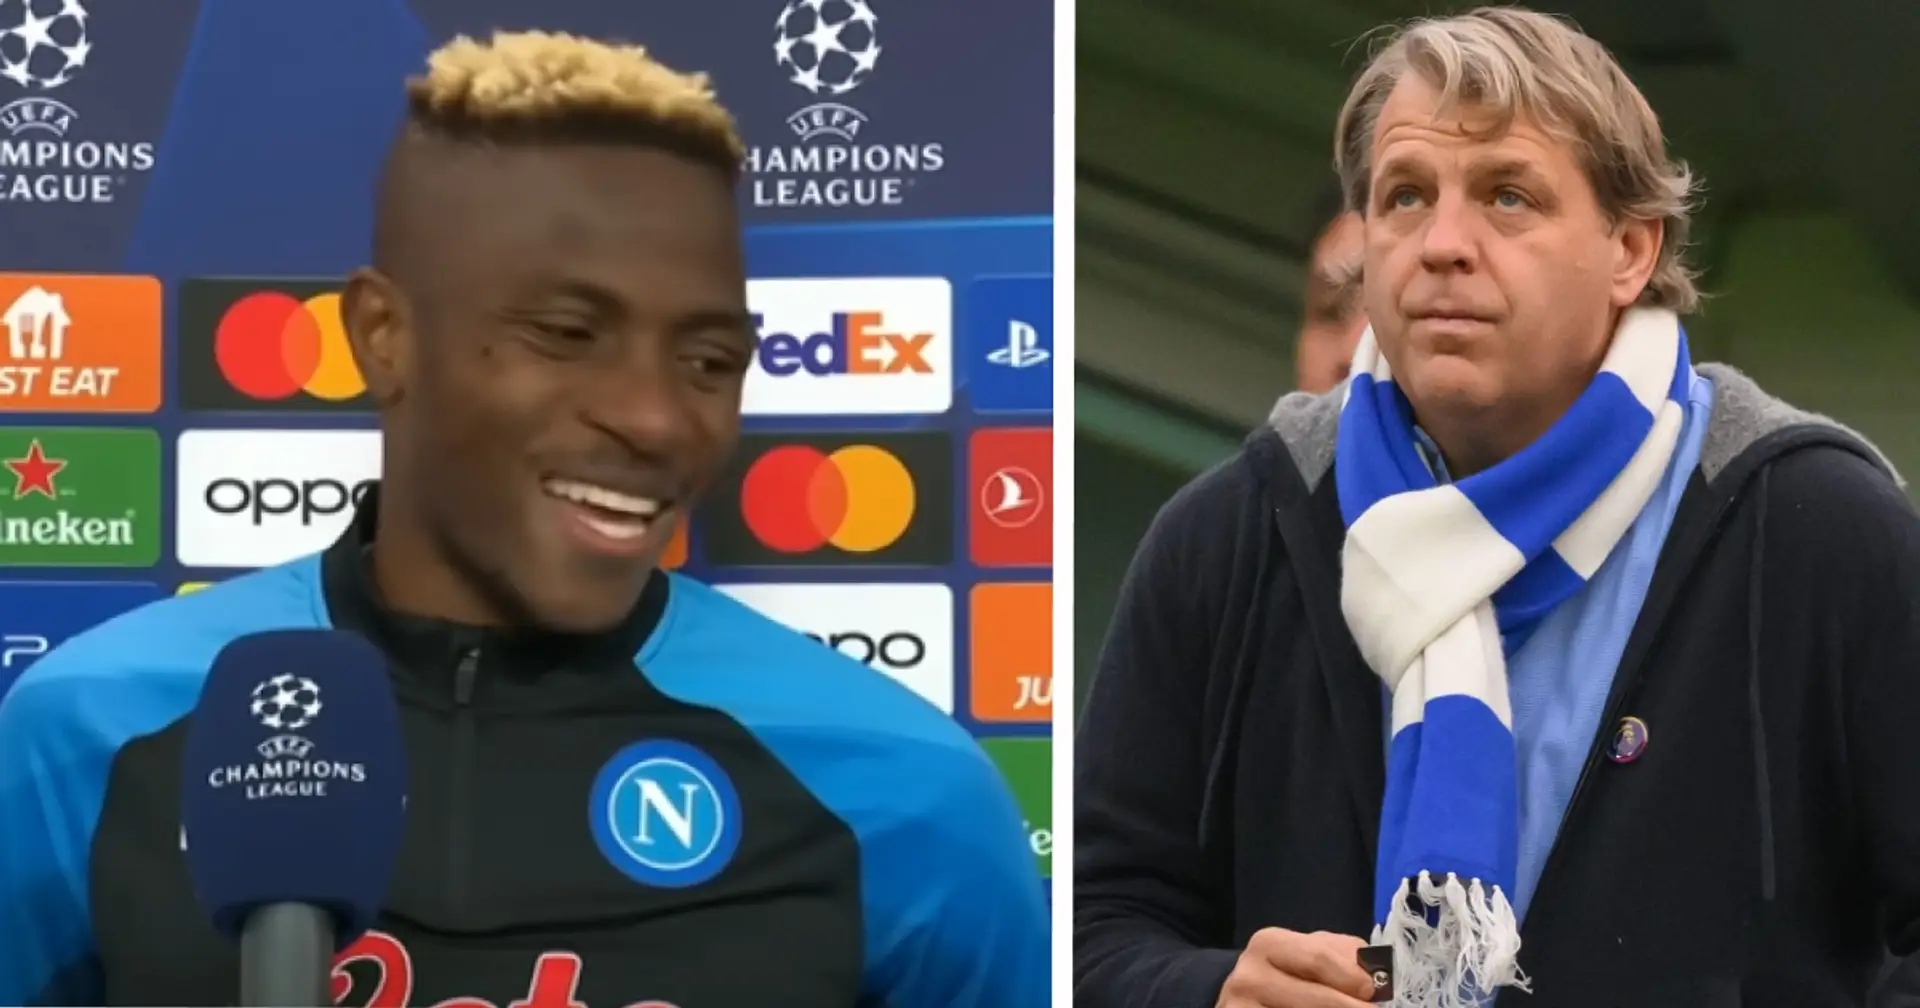 'I'm convinced': Victor Osimhen trending among Chelsea fans again after another Napoli win